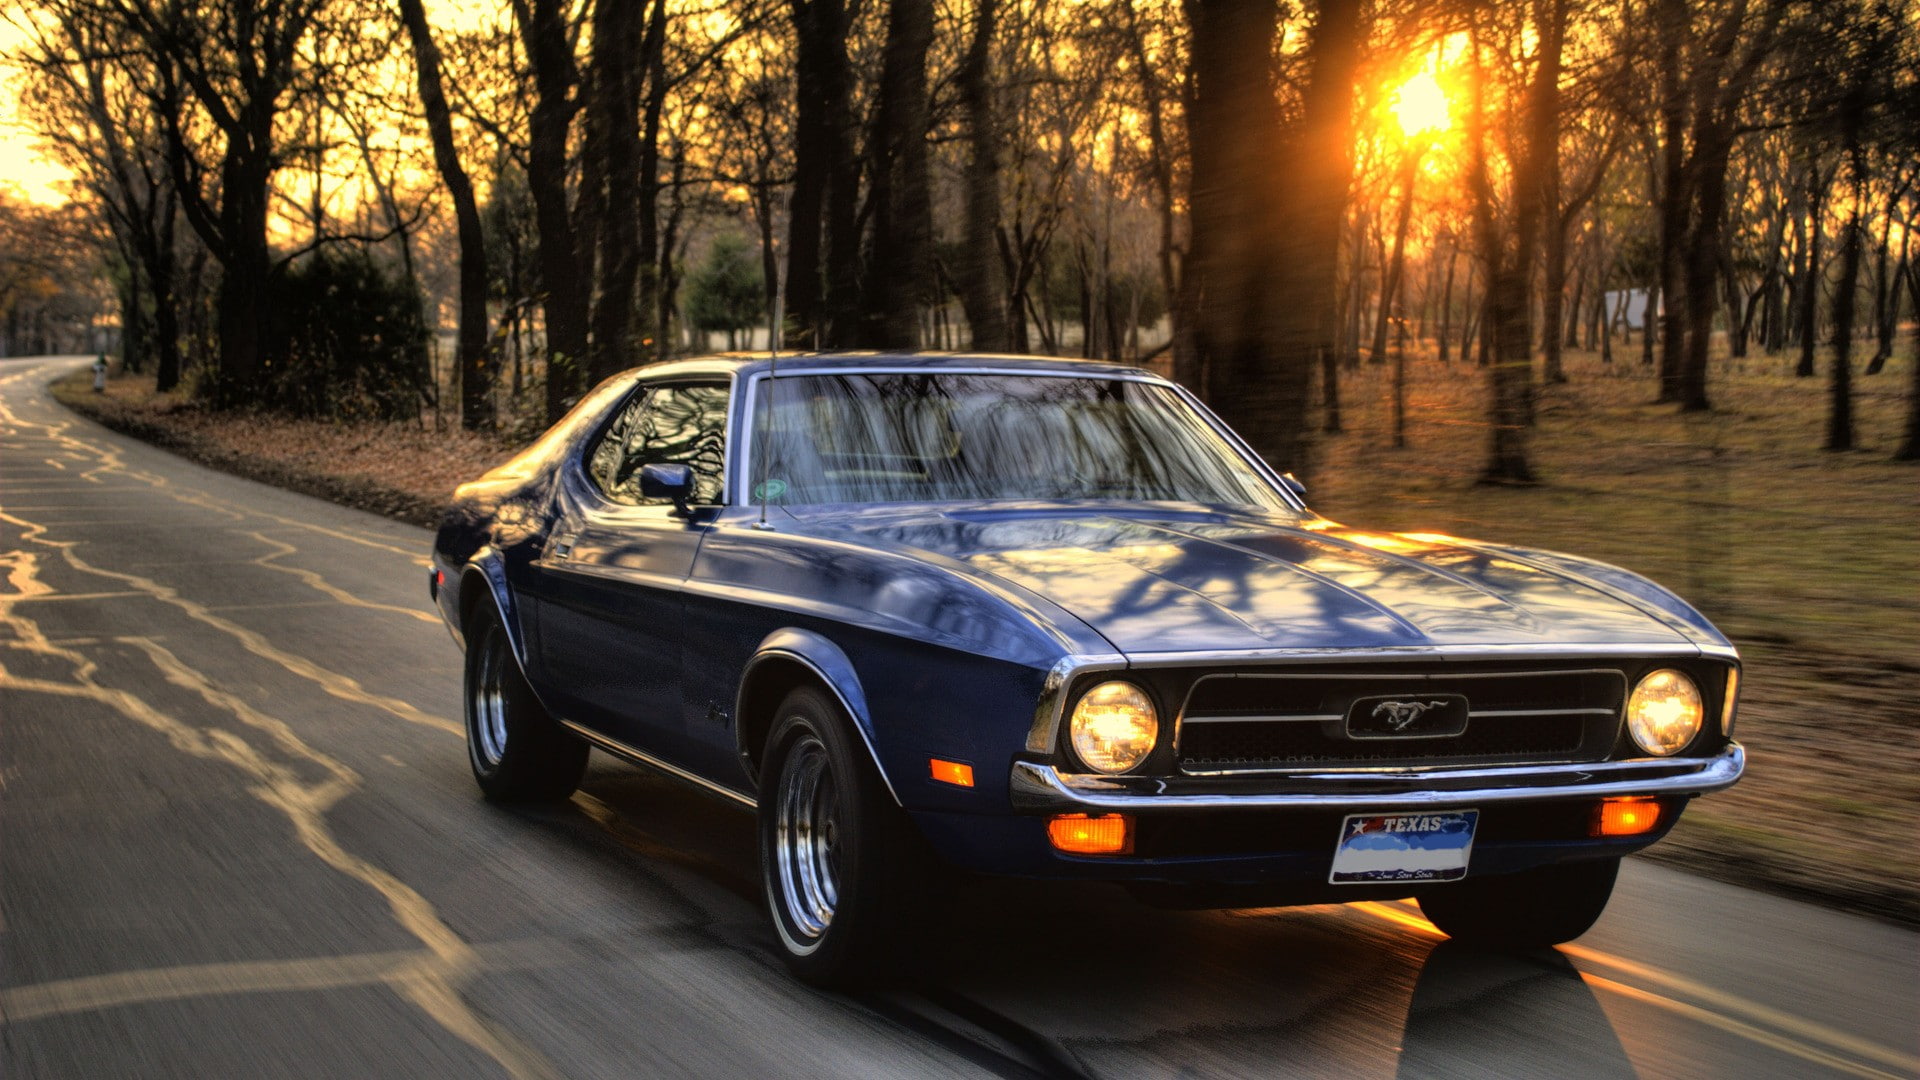 Car, Sunset, Trees, Road, Muscle Cars, Ford, Ford Mustang